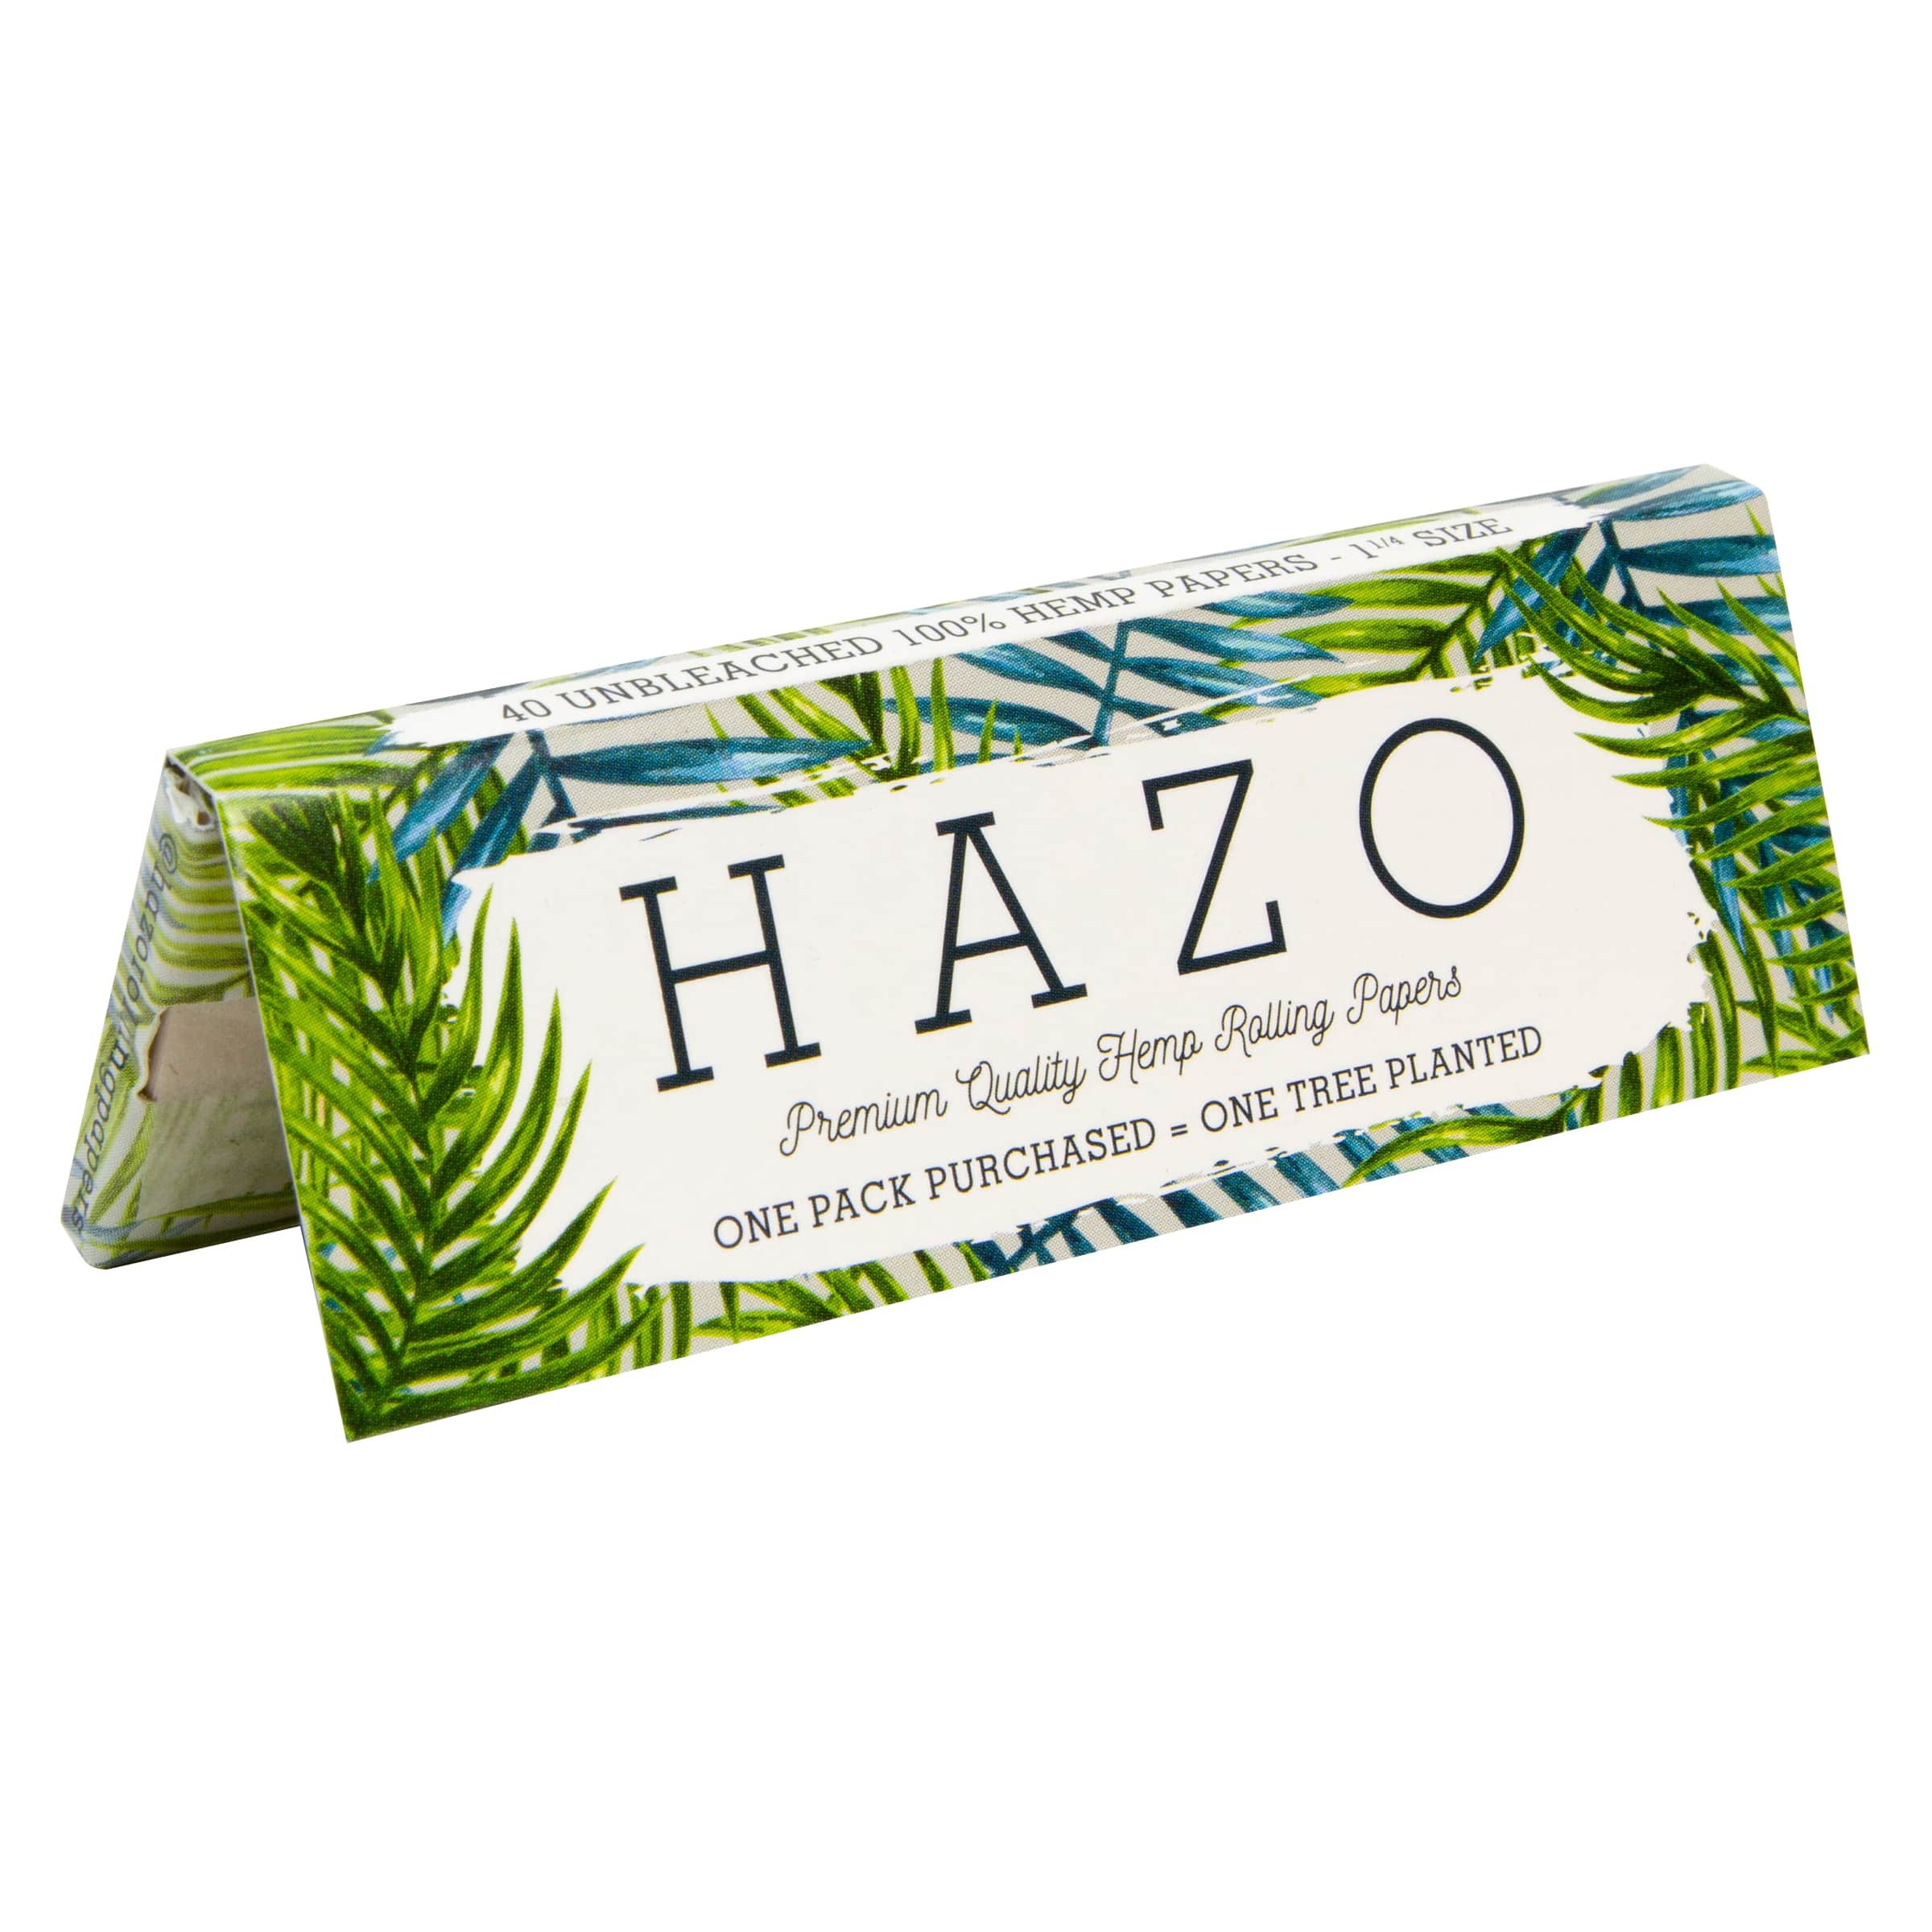 HAZO 1 1/4 Unbleached Hemp Rolling Papers